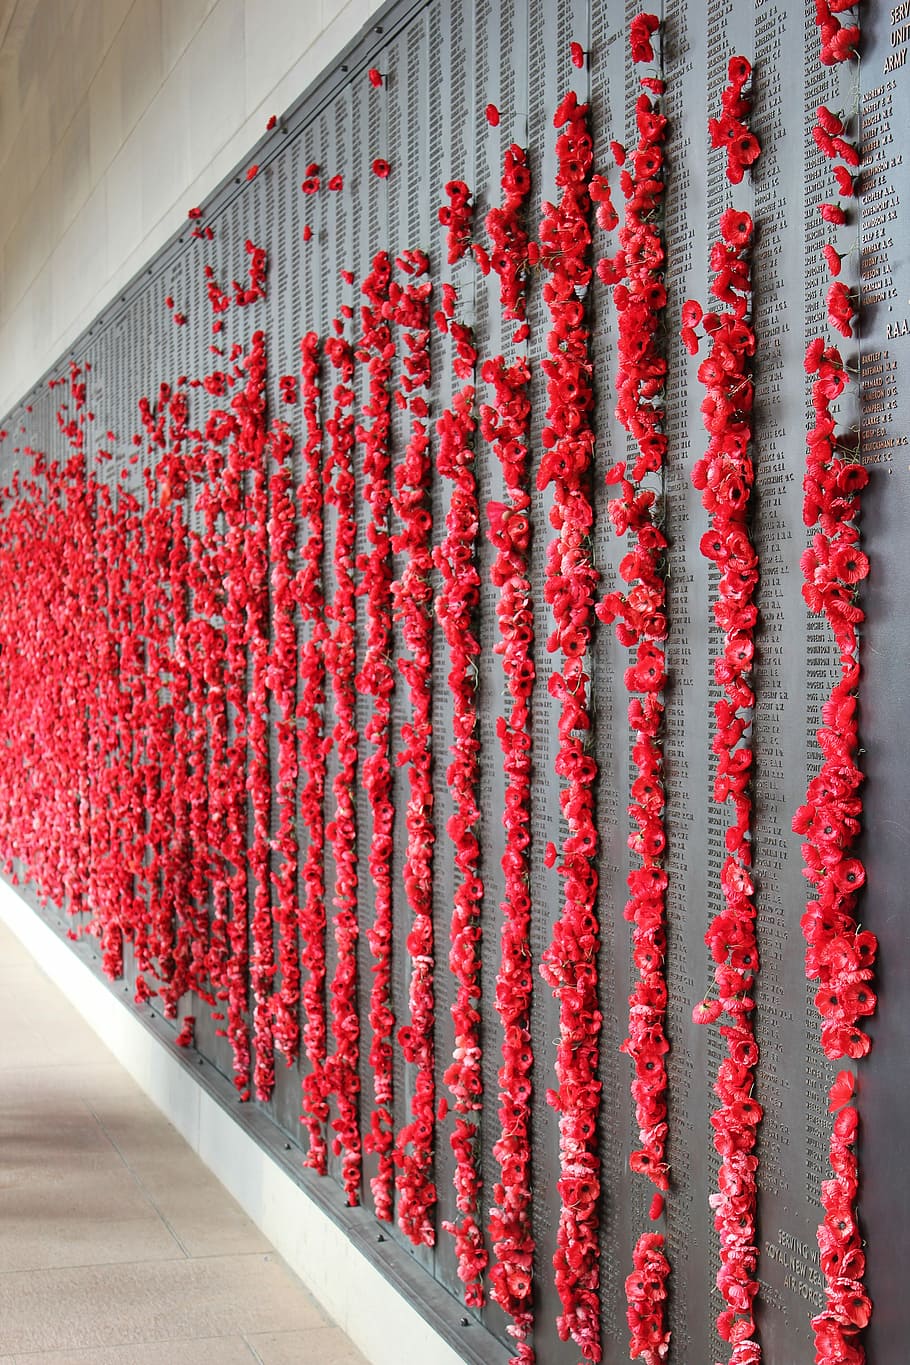 Poppies, Memorial, War, Remembrance, anzac, military, red, food and drink